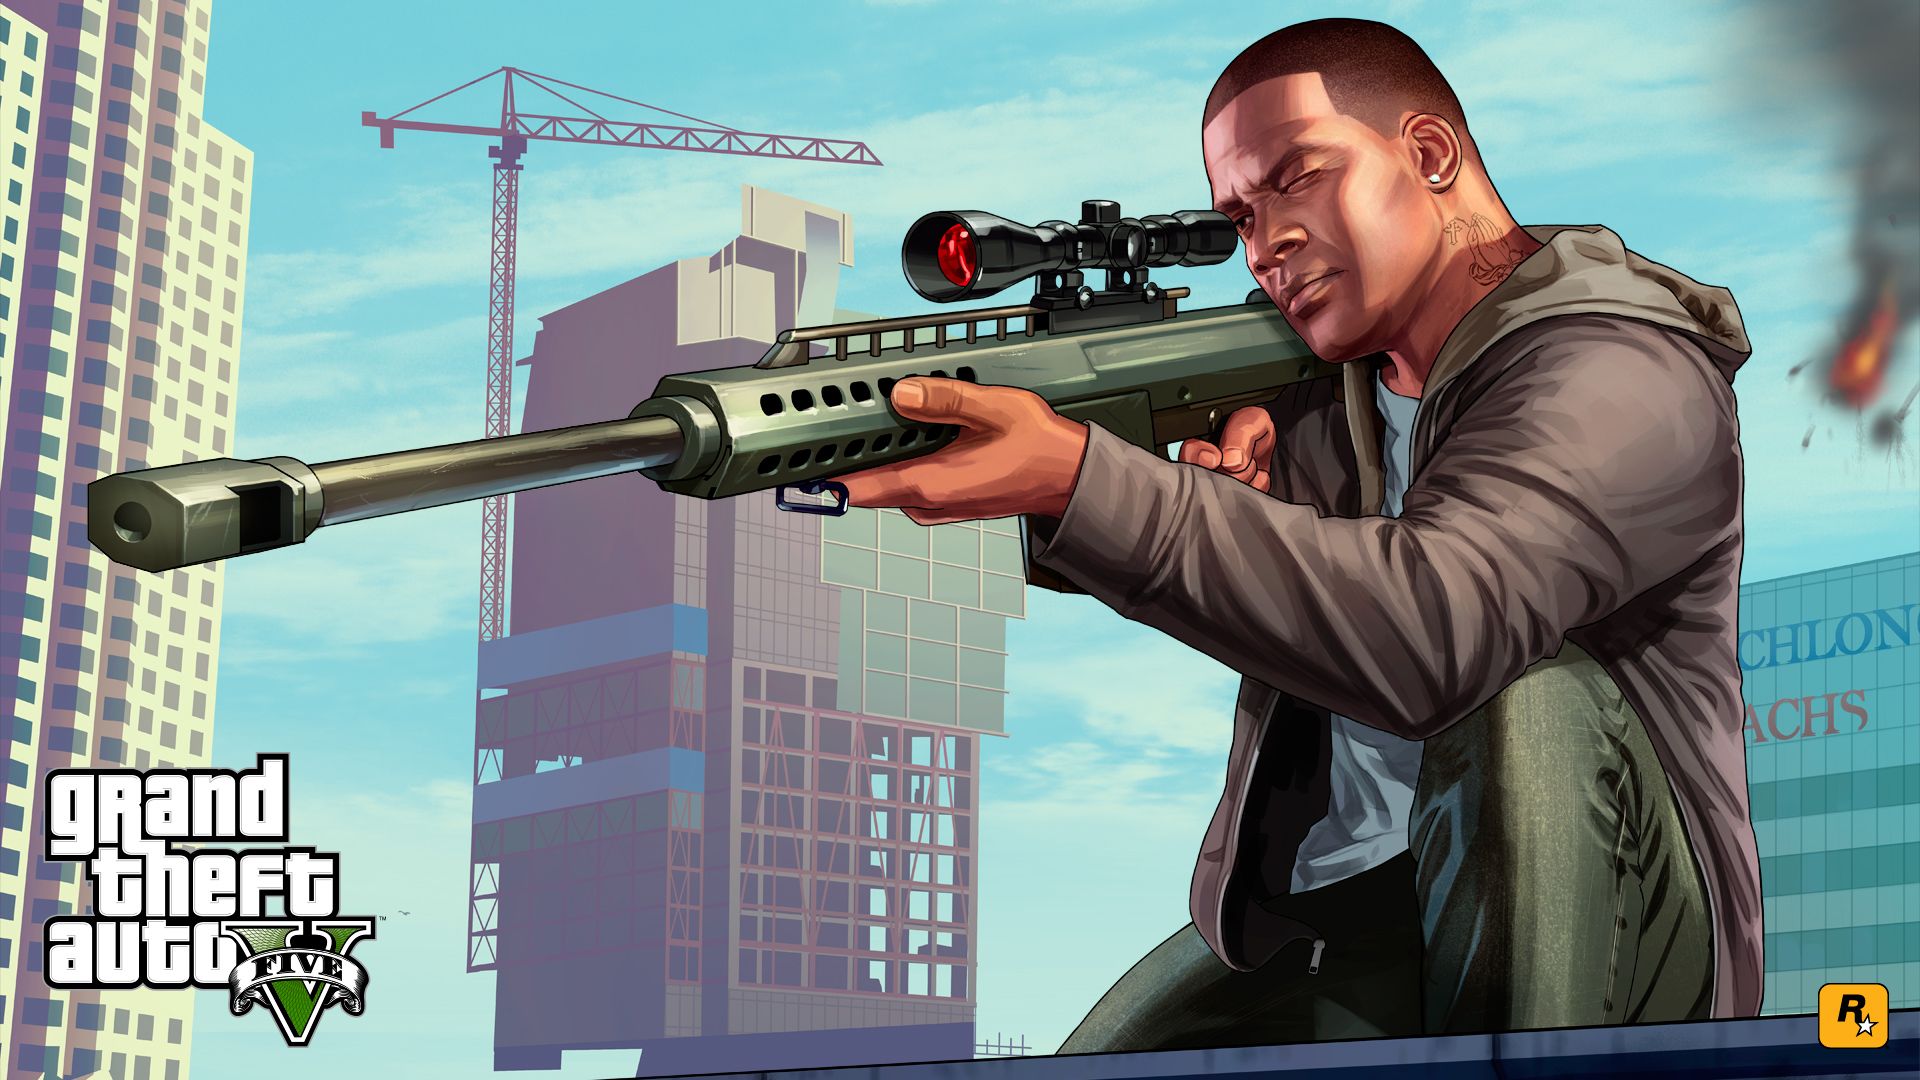 15 LittleKnown Facts About Grand Theft Auto